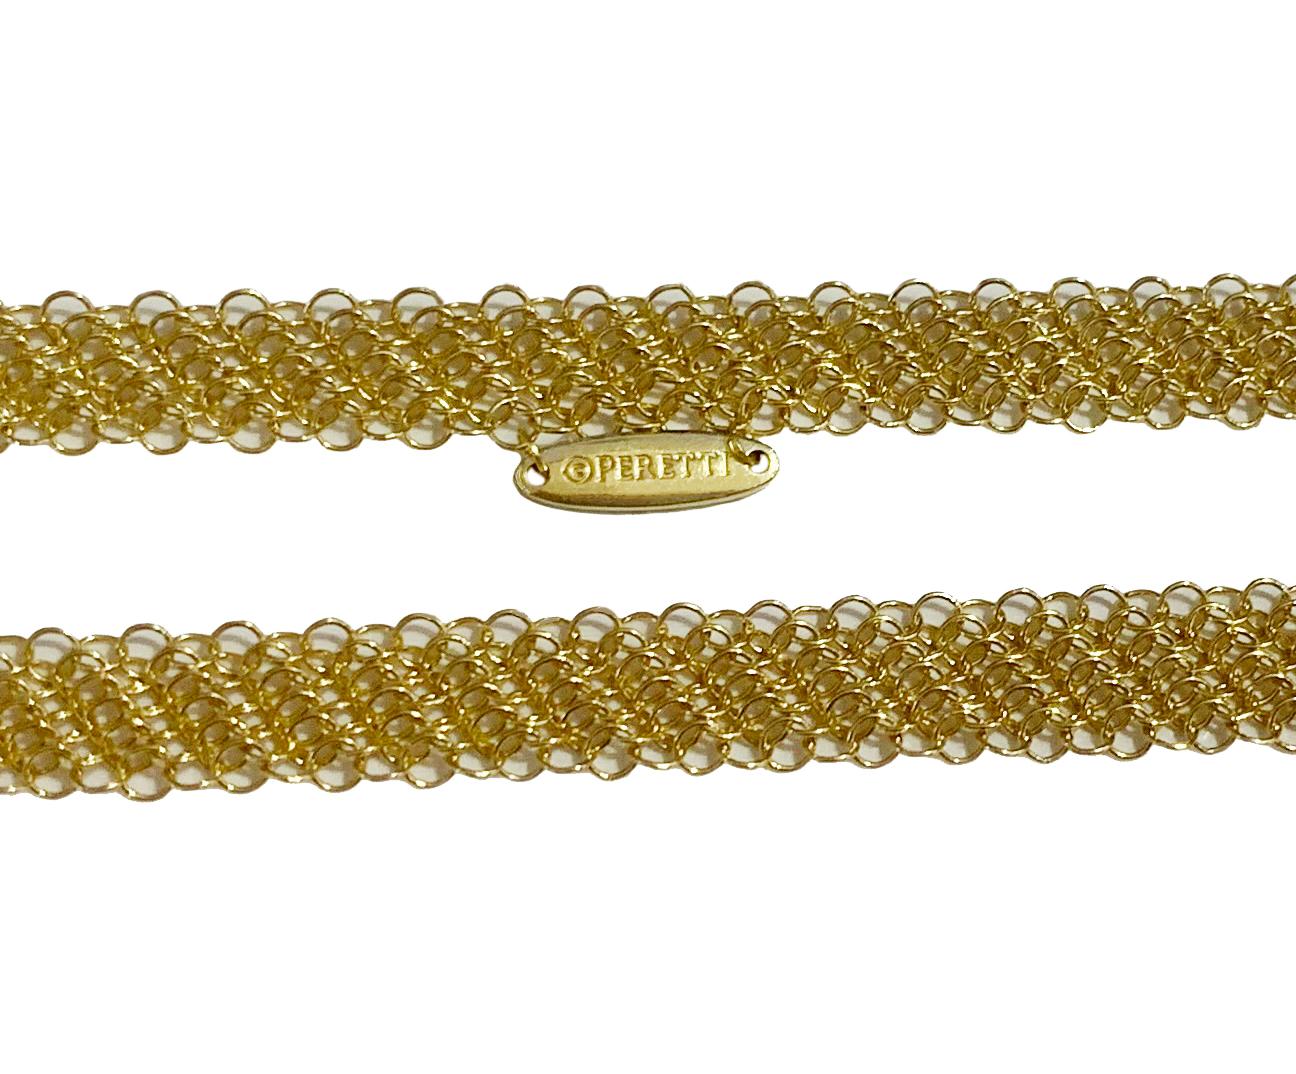 Mint condition
18k Yellow Gold
Weight: 11gr
Length: 30”
Width: 5.5mm
Comes with Tiffany box